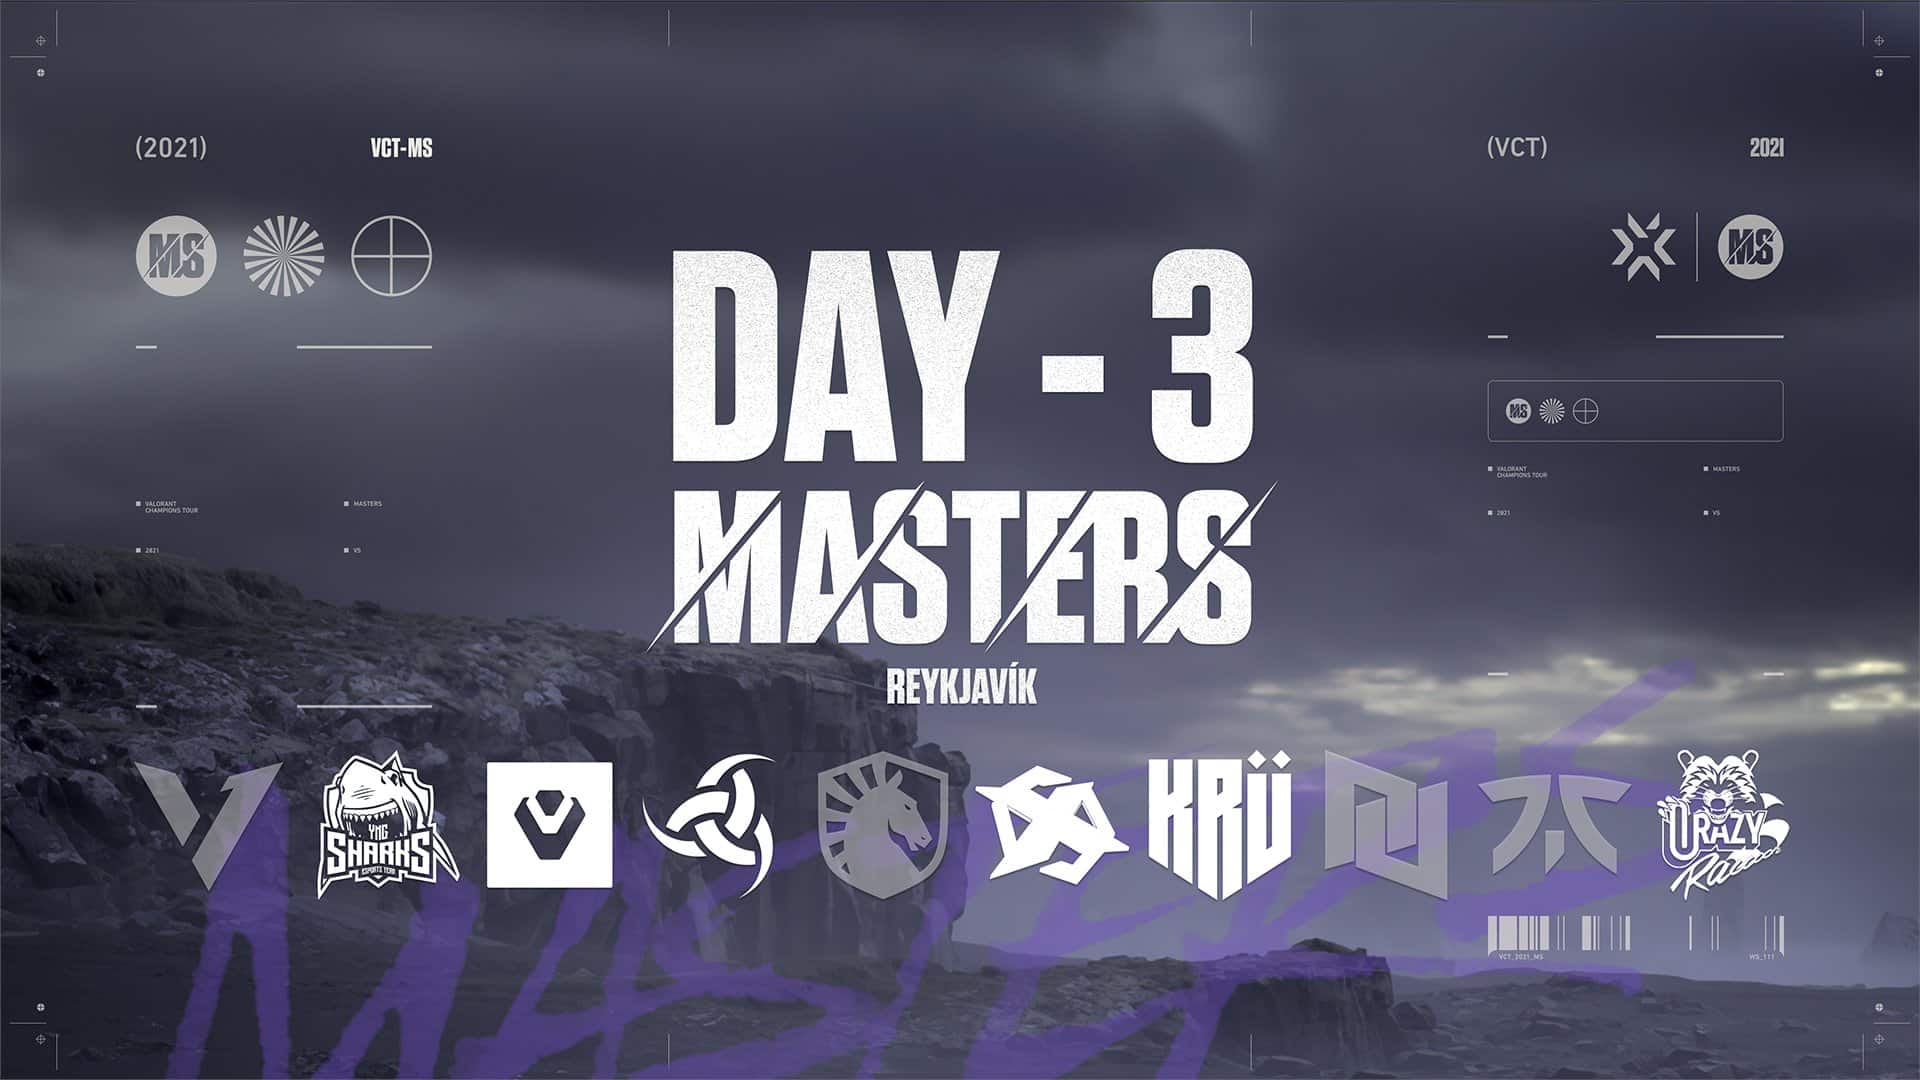 VCT Stage 2 Masters Iceland Day 3 preview